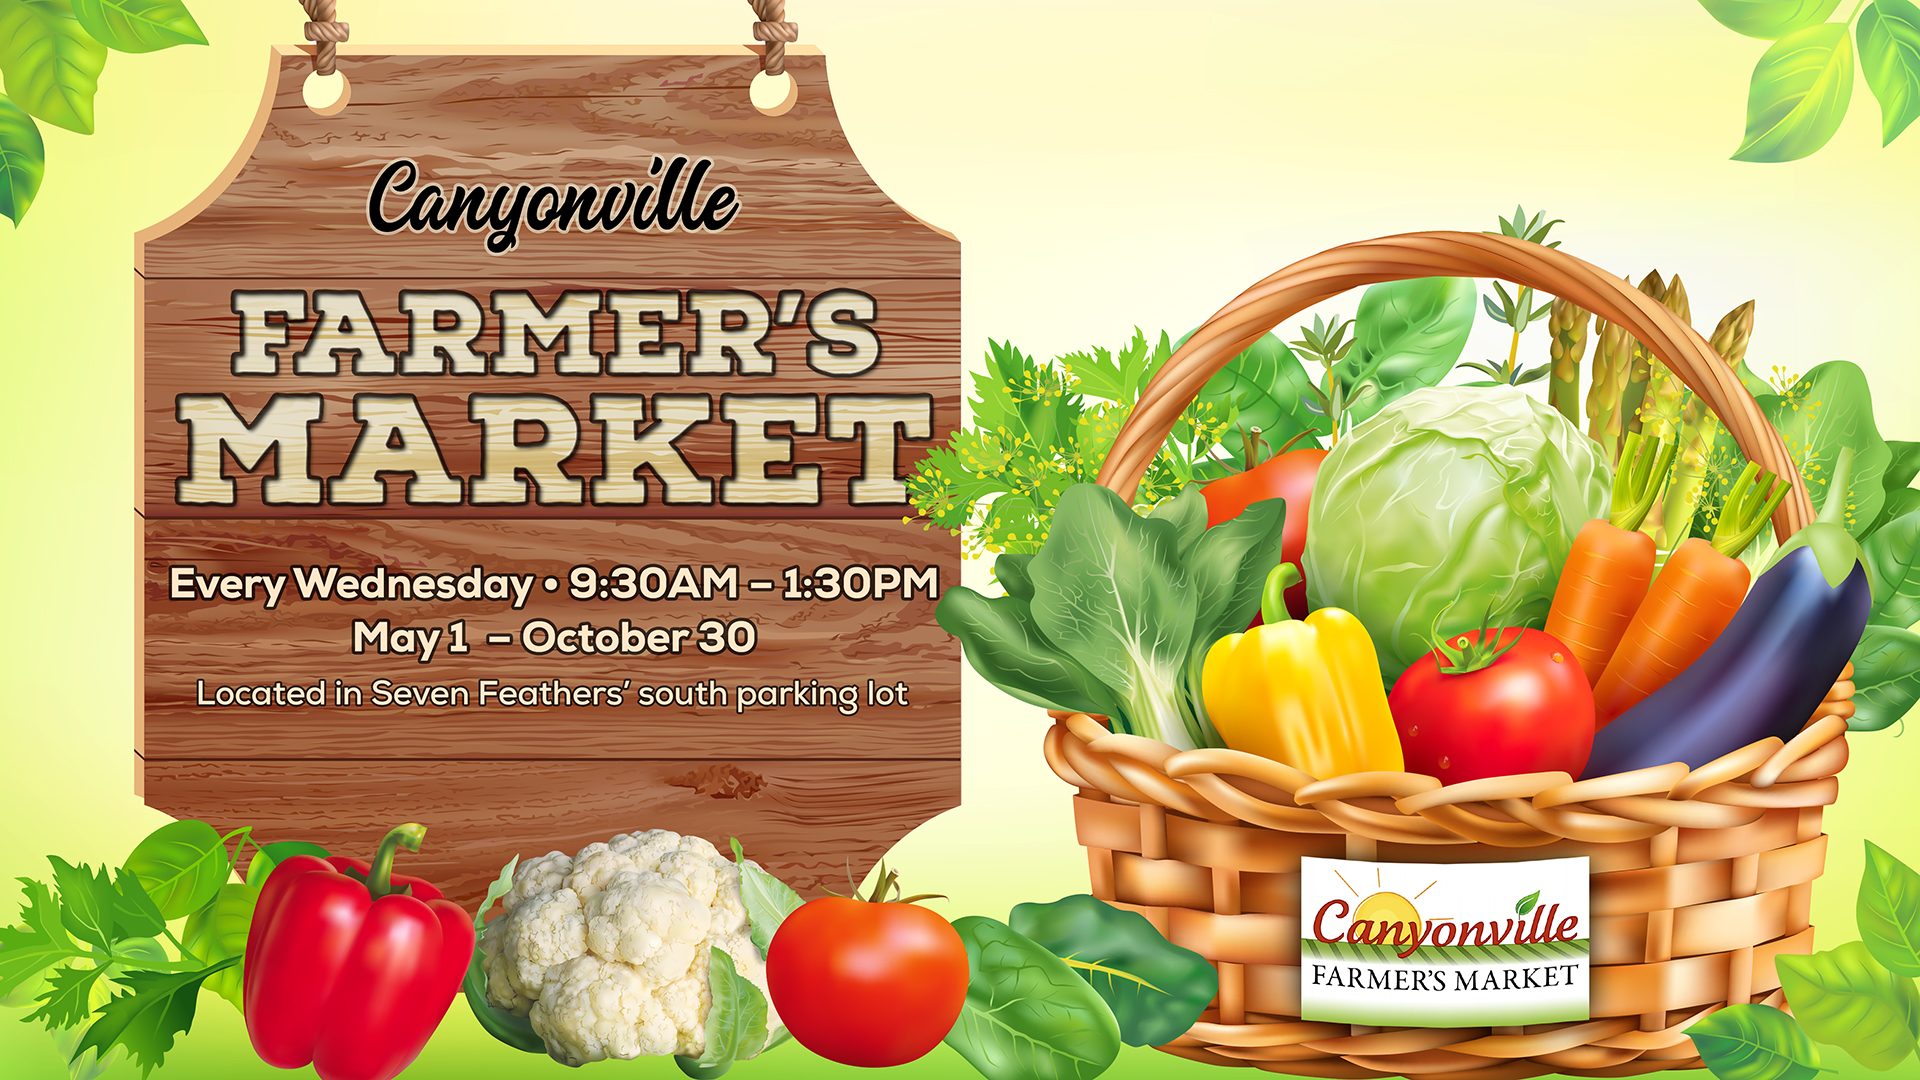 Seven Feathers Casino Resort Is Proud To Host The Canyonville Farmers Market